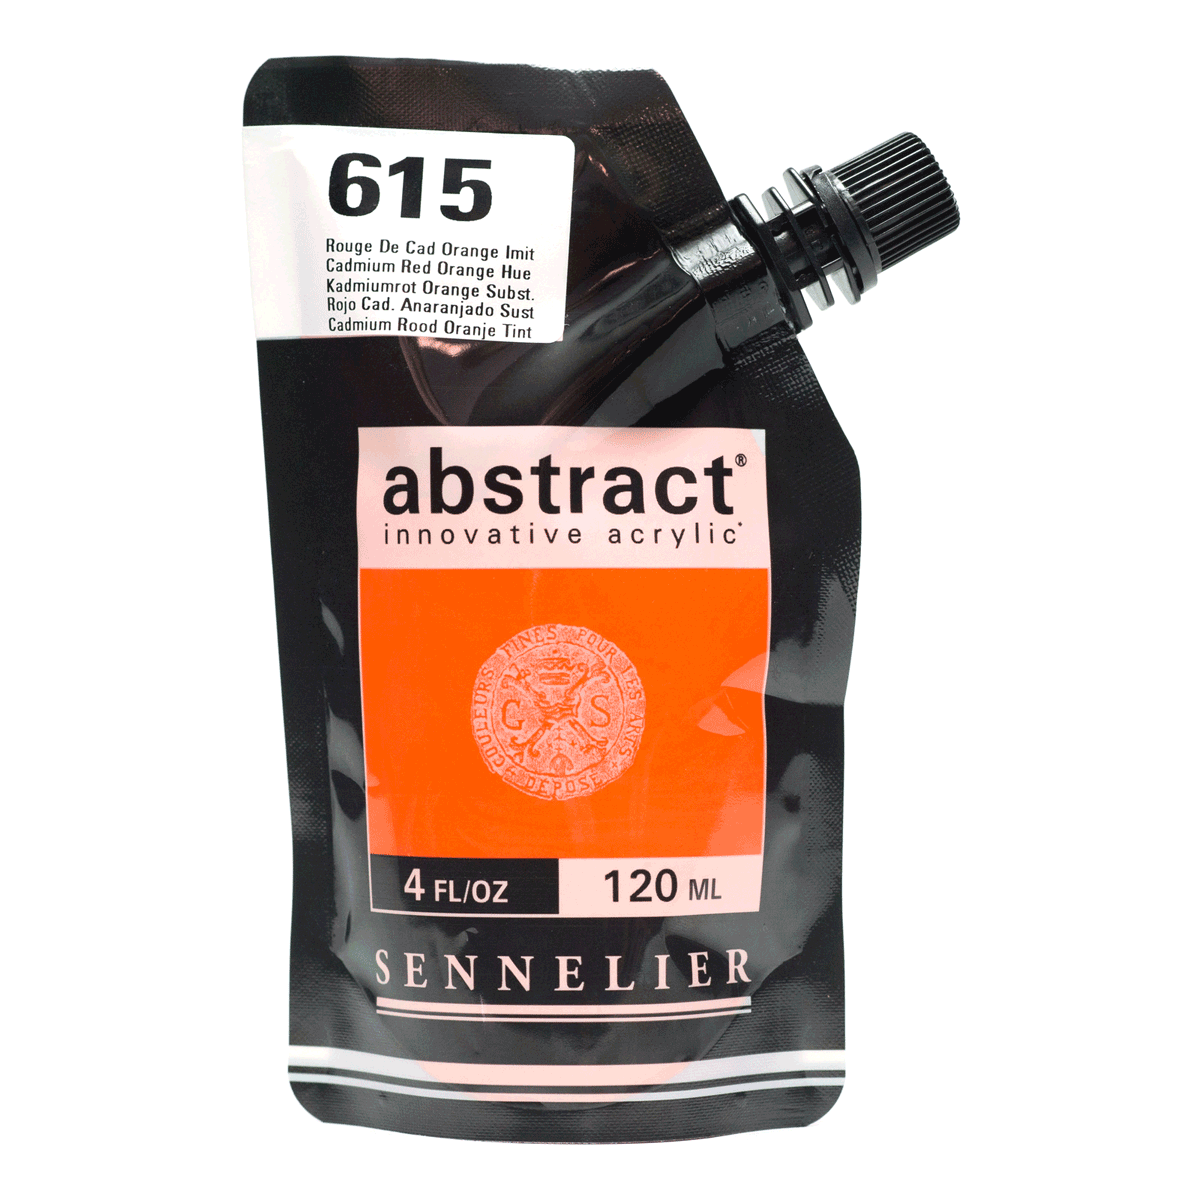 Abstract Acrylic Pouch - Satin 615 Cad Red Orange Hue 120ml